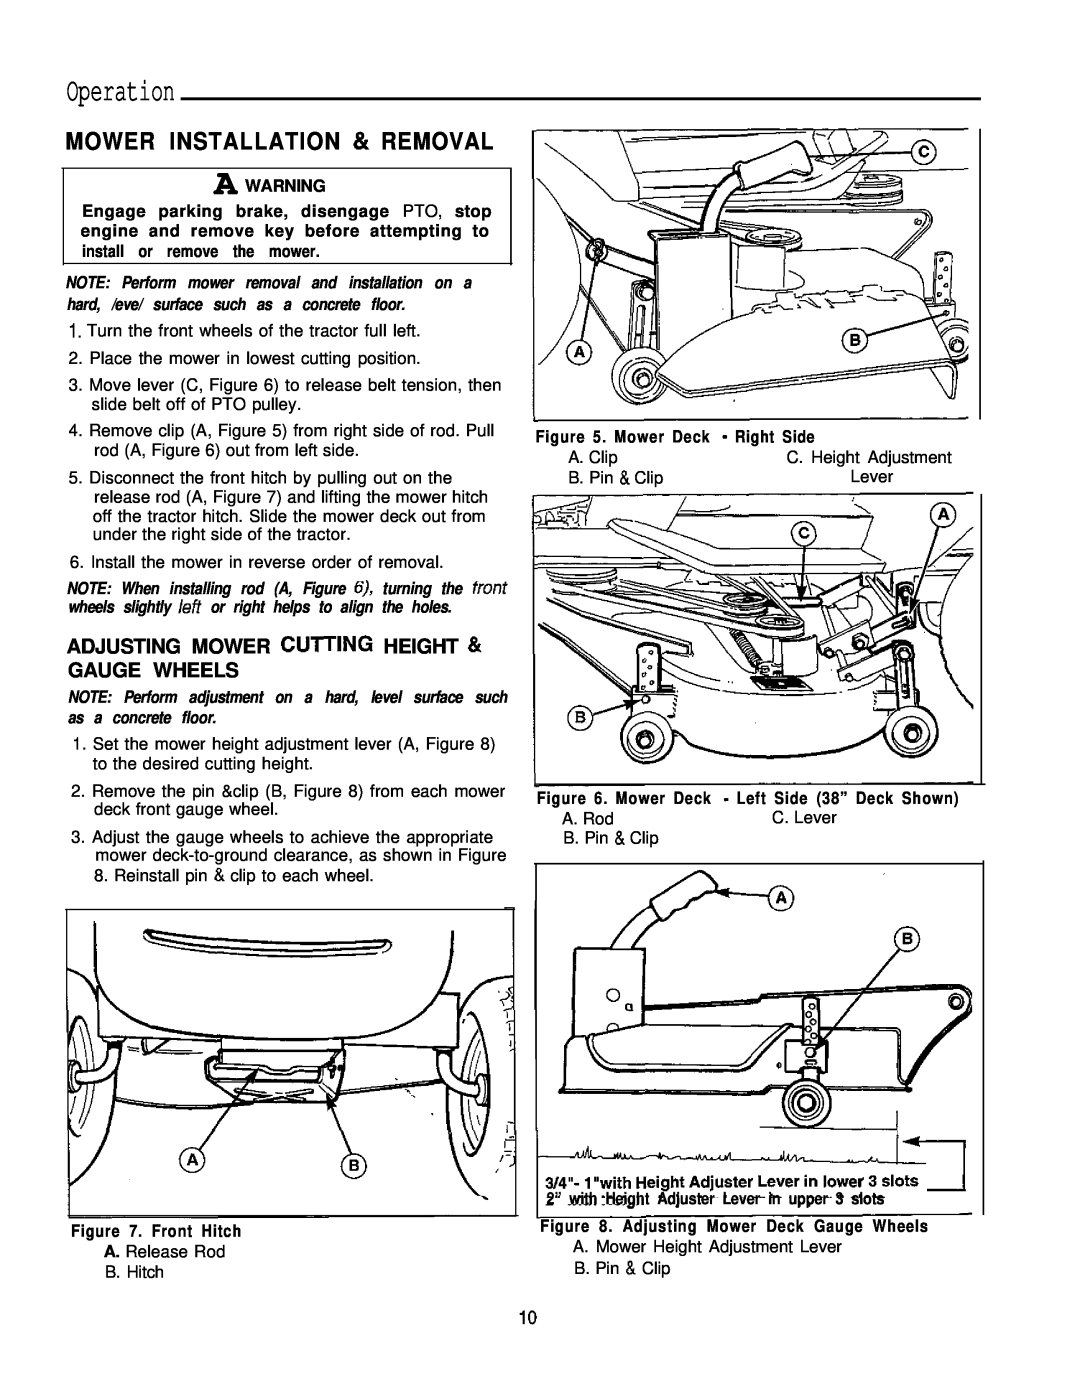 Simplicity 1693266, 1693264 manual Operation, Mower Installation & Removal, A Warning, Front Hitch, Mower Deck - Right Side 